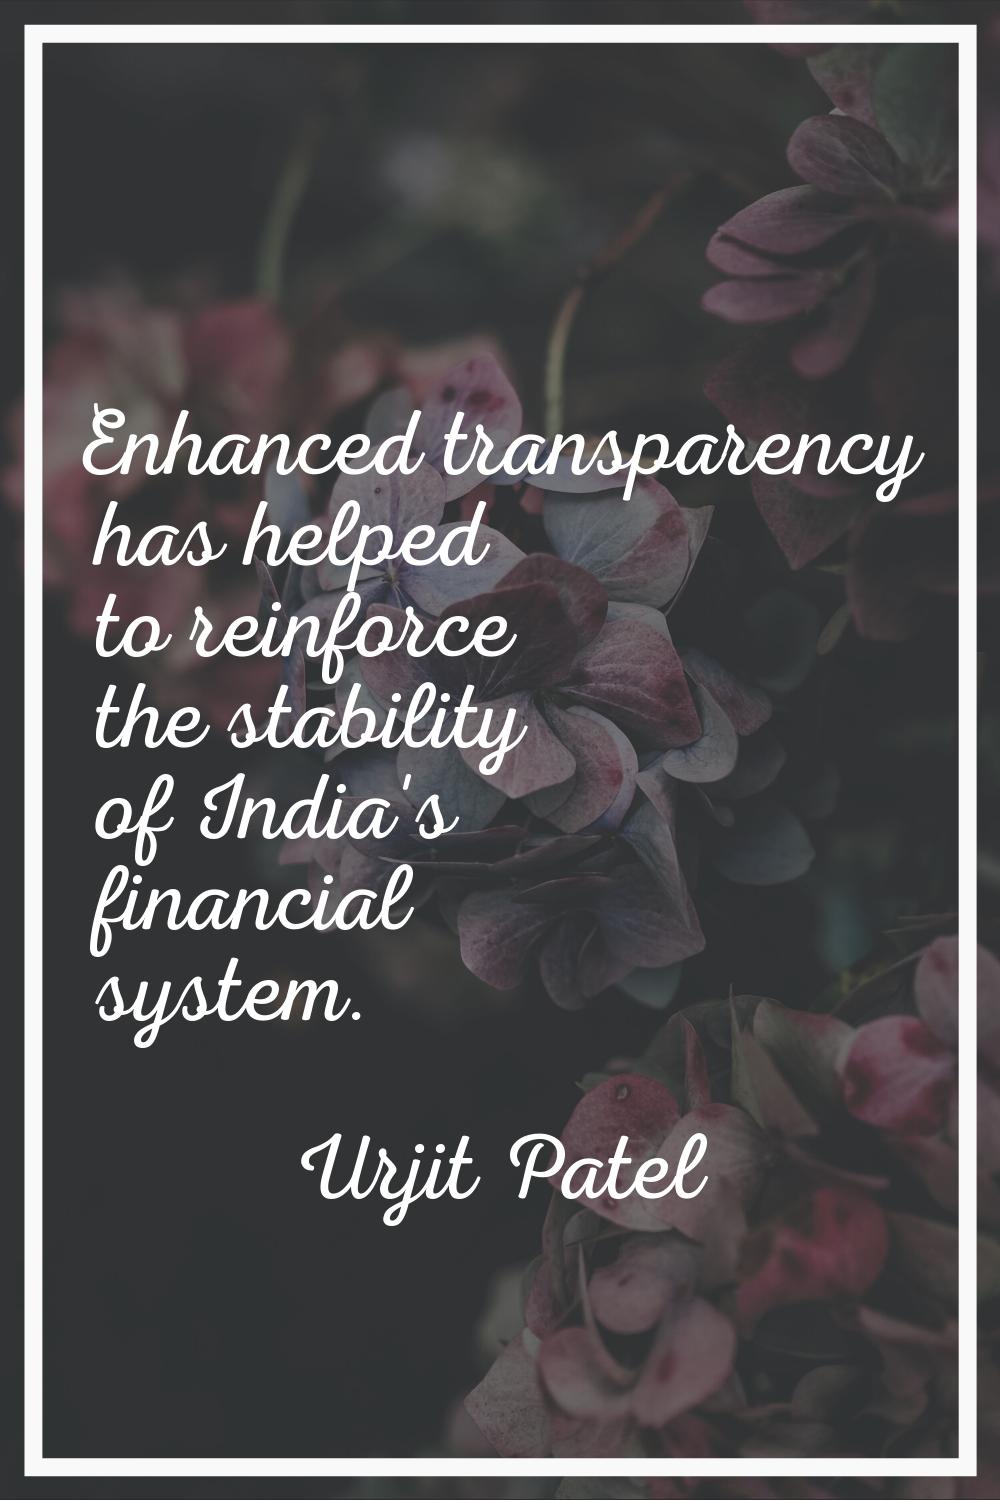 Enhanced transparency has helped to reinforce the stability of India's financial system.